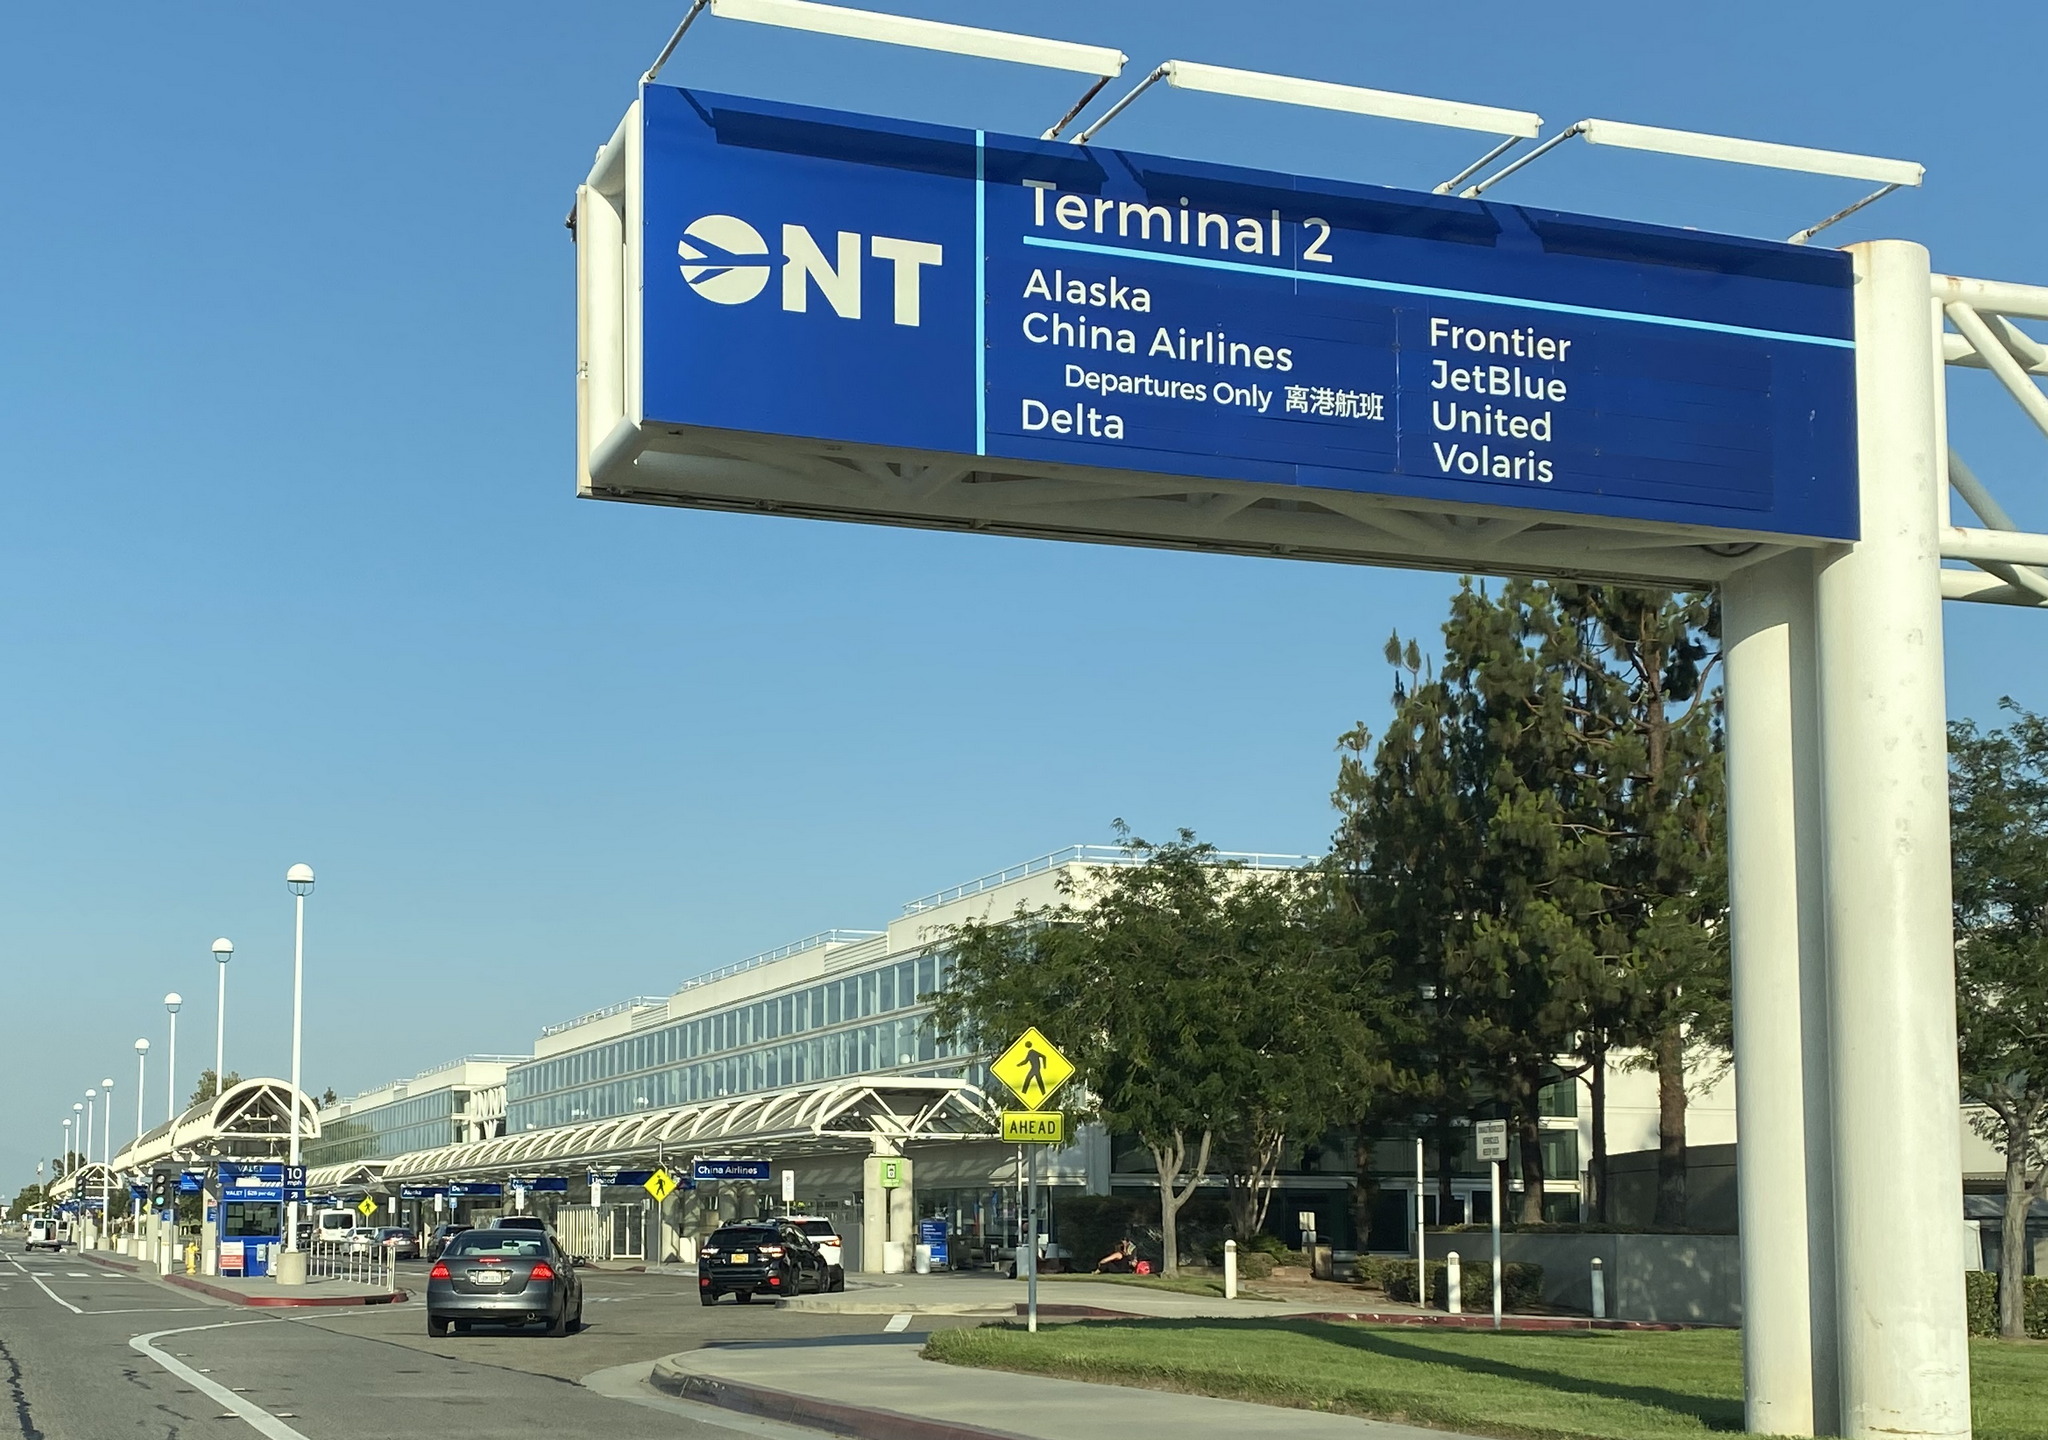 Ontario airport departure area and sign